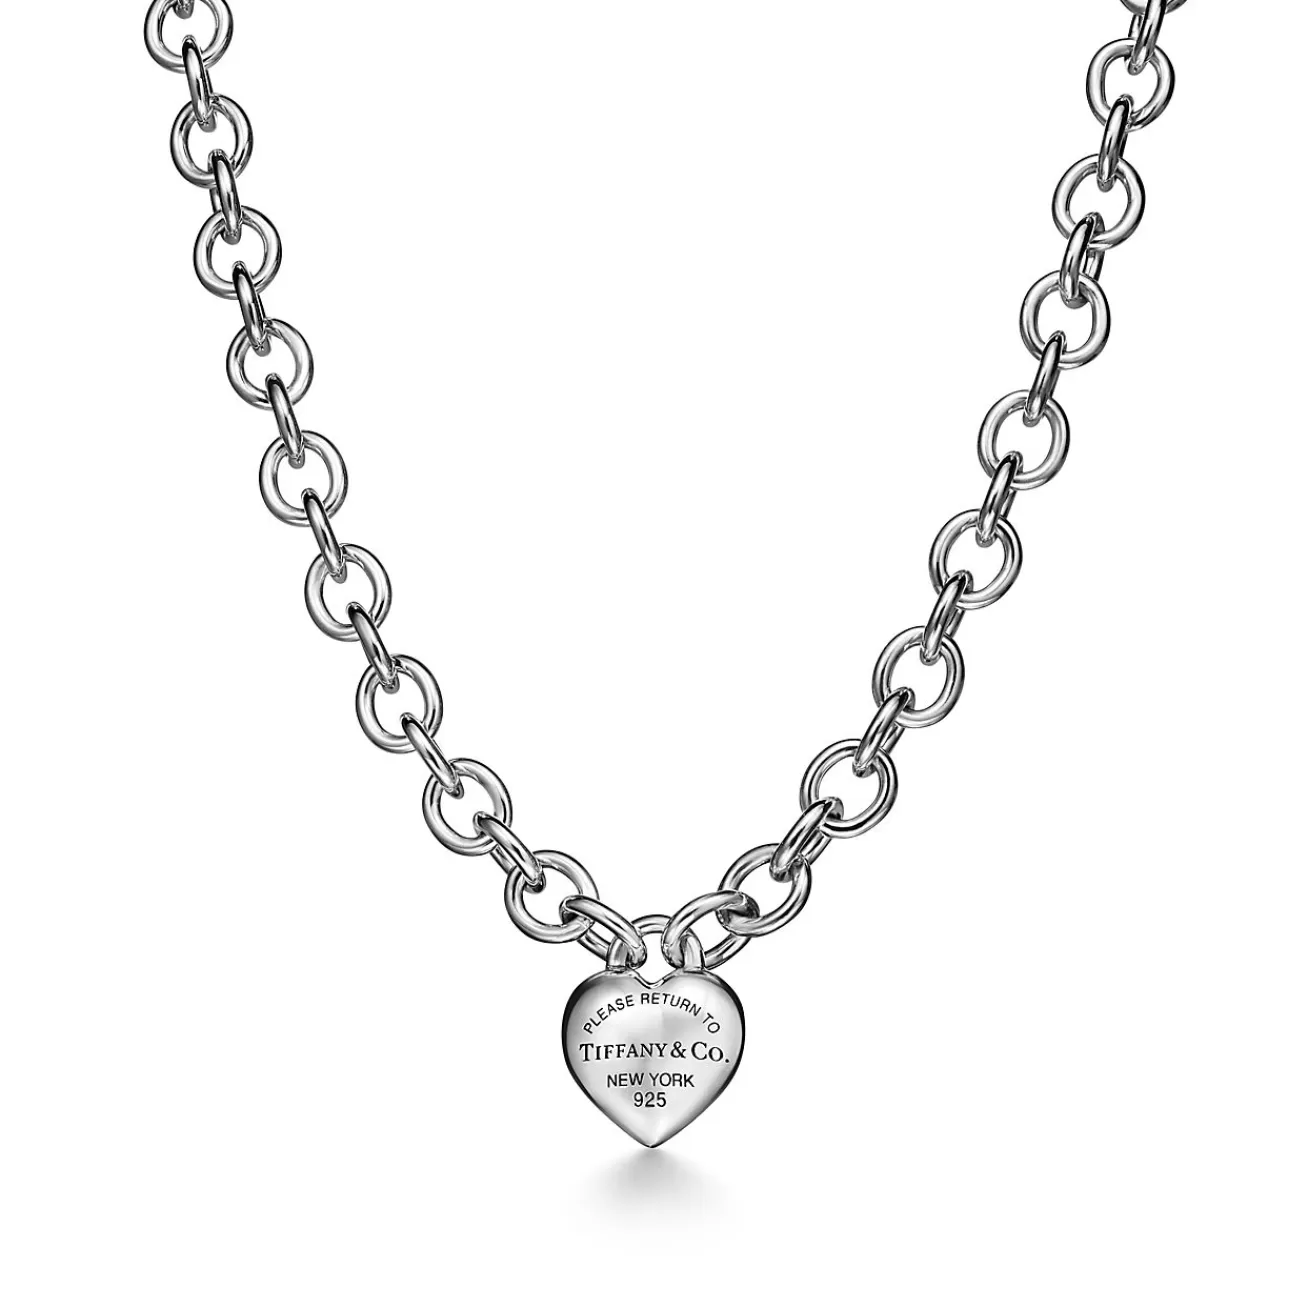 Tiffany & Co. Return to Tiffany® Full Heart Toggle Necklace in Sterling Silver | ^ Necklaces & Pendants | Gifts for Her